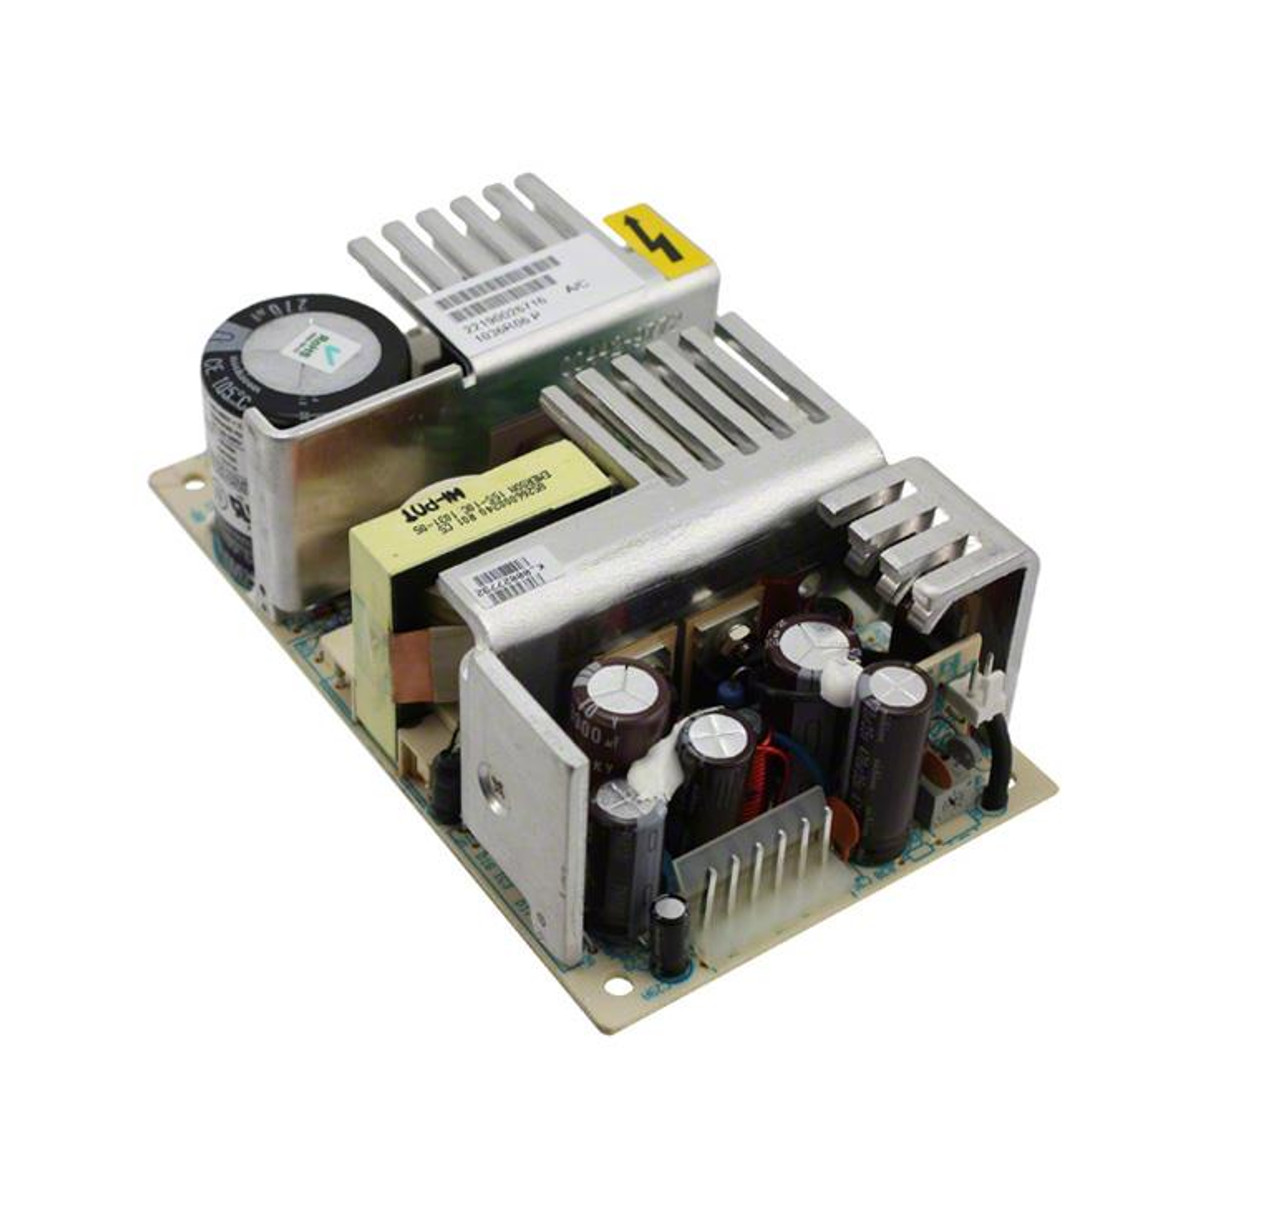 LPT62 Astec 60 Watts Open Frame Power Supply for B2 System